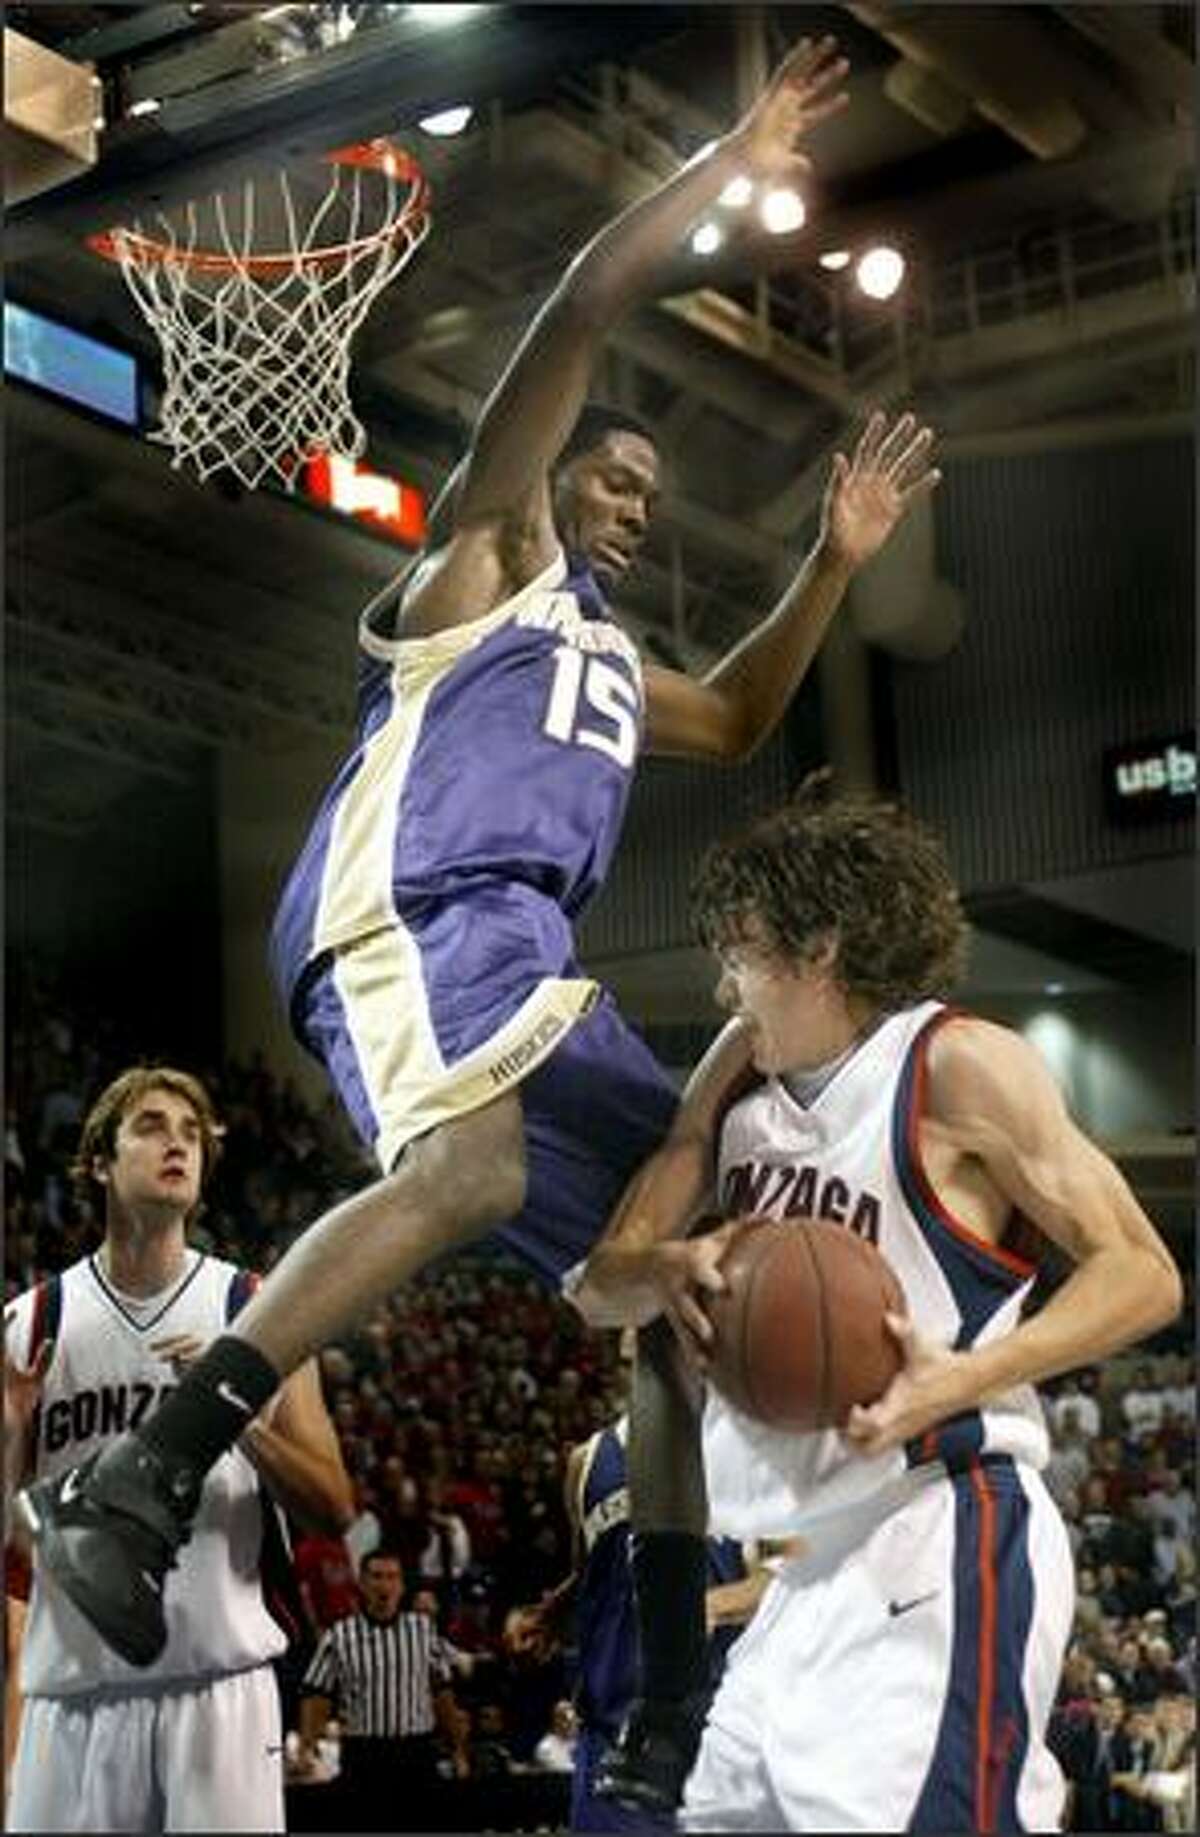 Bobby Jones' defense couldn't shut down Gonzaga's leading scorer Adam Morrison as he torched the Huskies for 26 points.